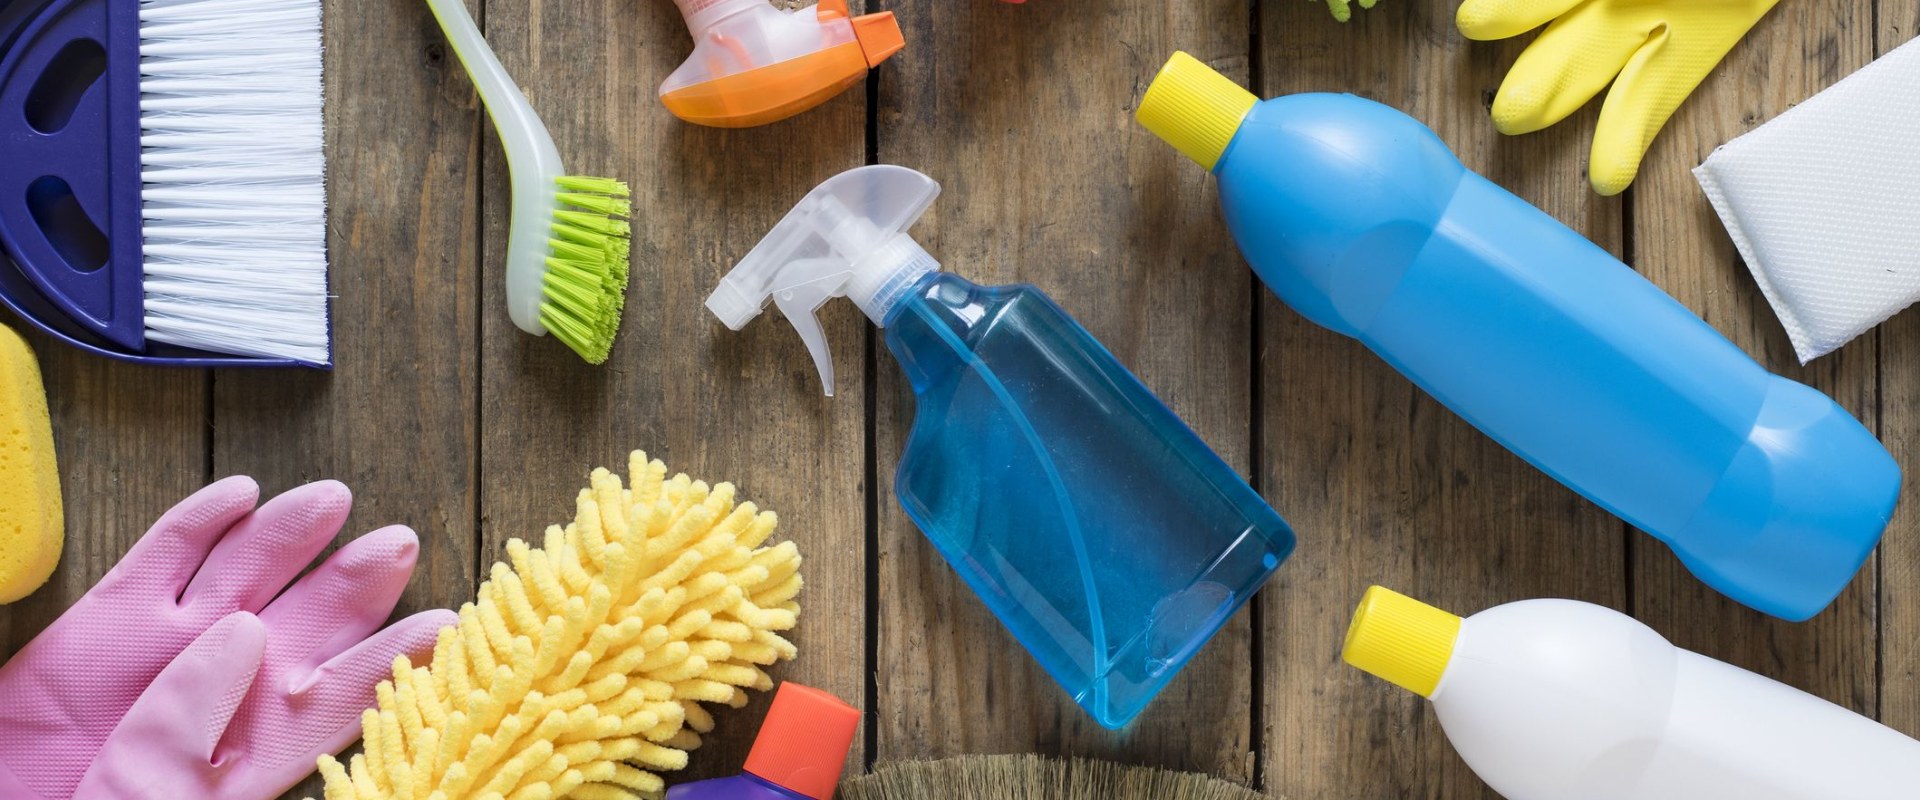 How much do people spend on cleaning products?